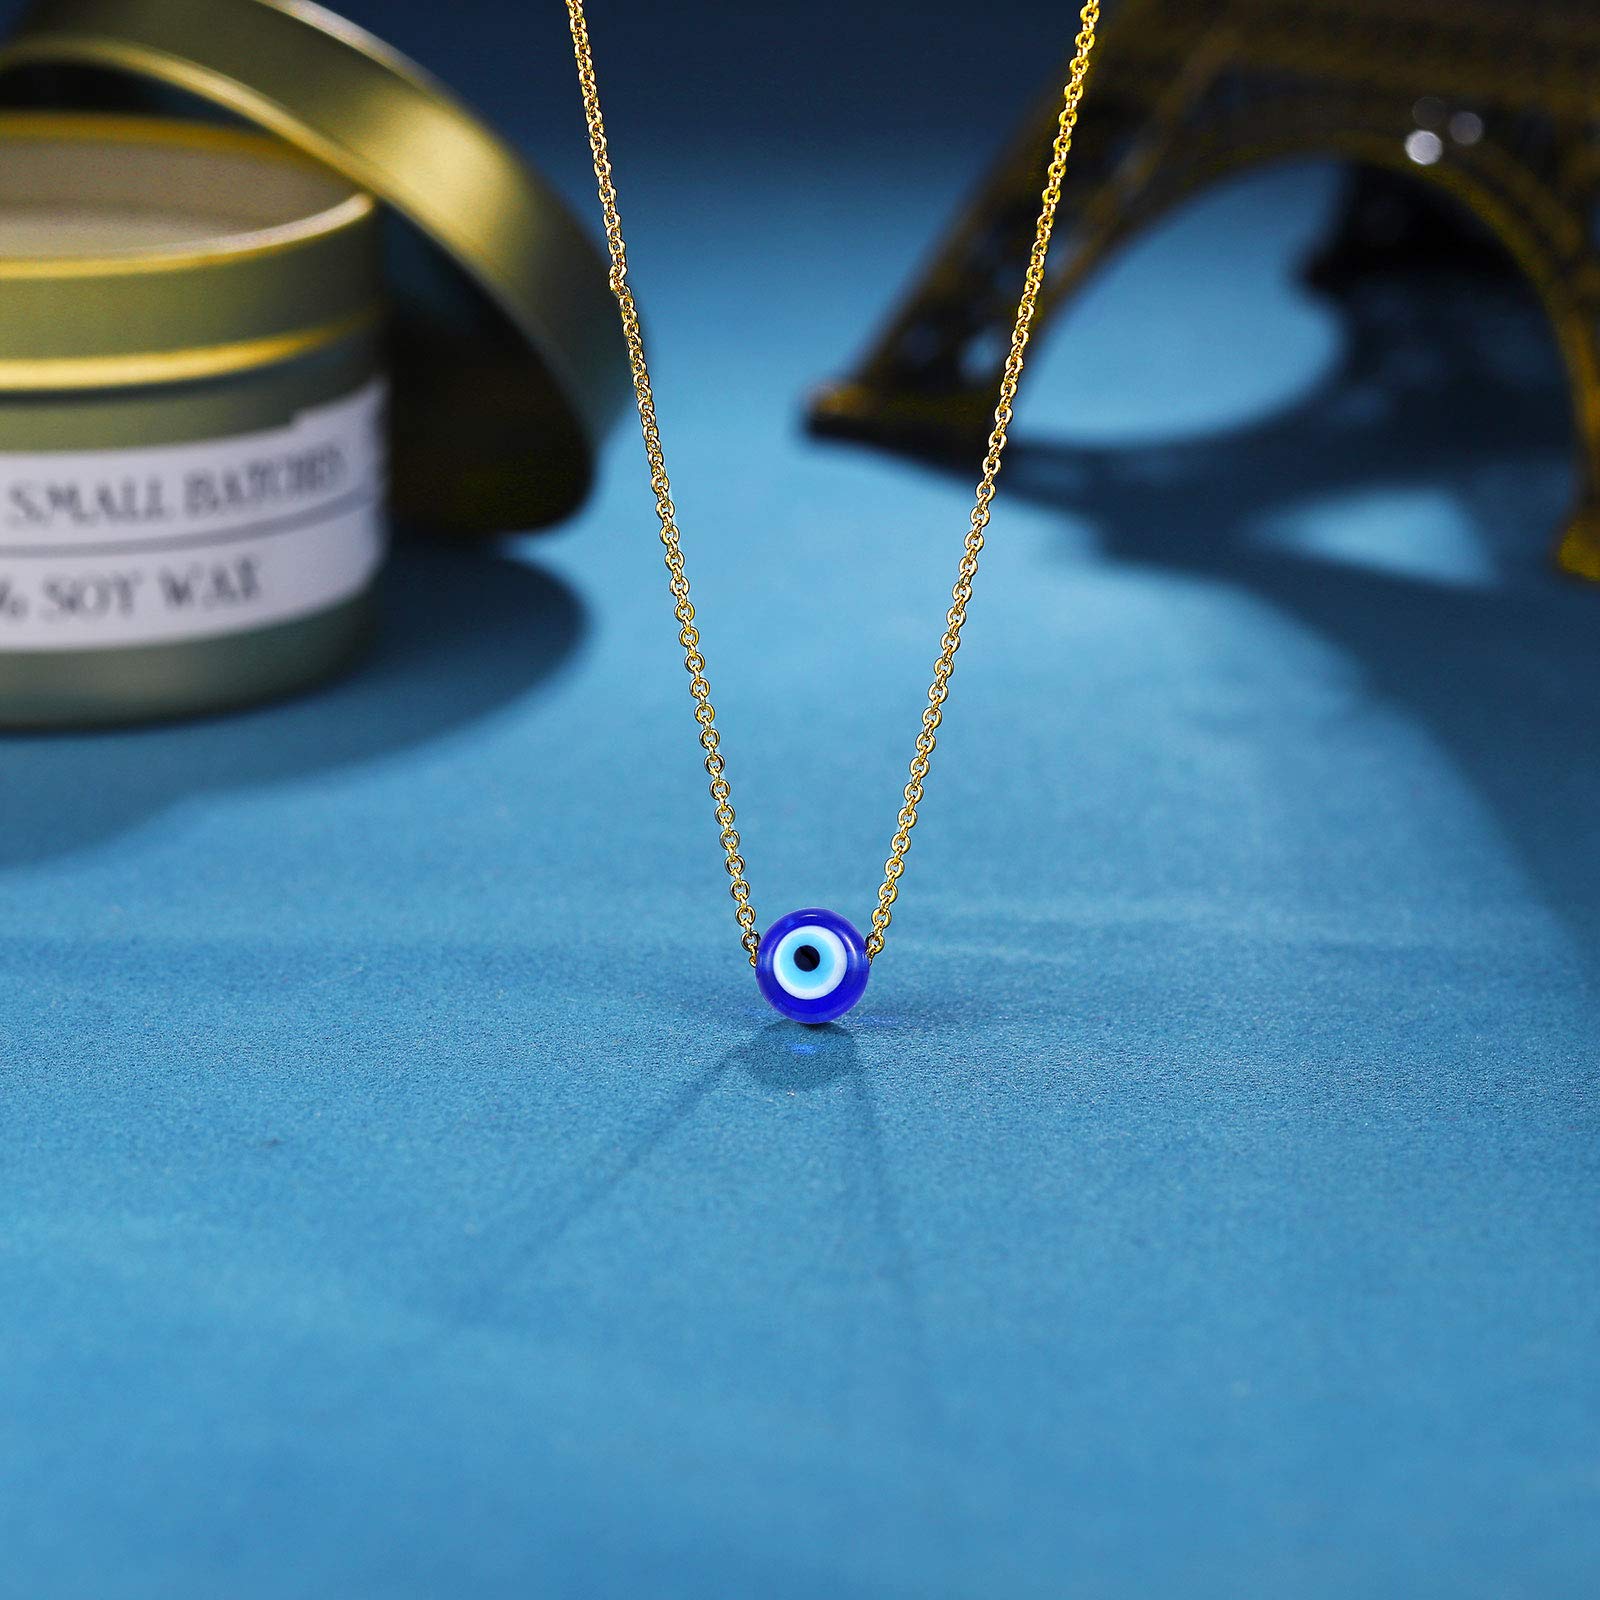 Sincere Evil Eye Necklace Blue Eyes Luck Protection Amulet Pendant Necklace Ojo Turco Kabbalah Adjustable Evil Eye Jewelry Gift for Women Girls（Silver/Gold）